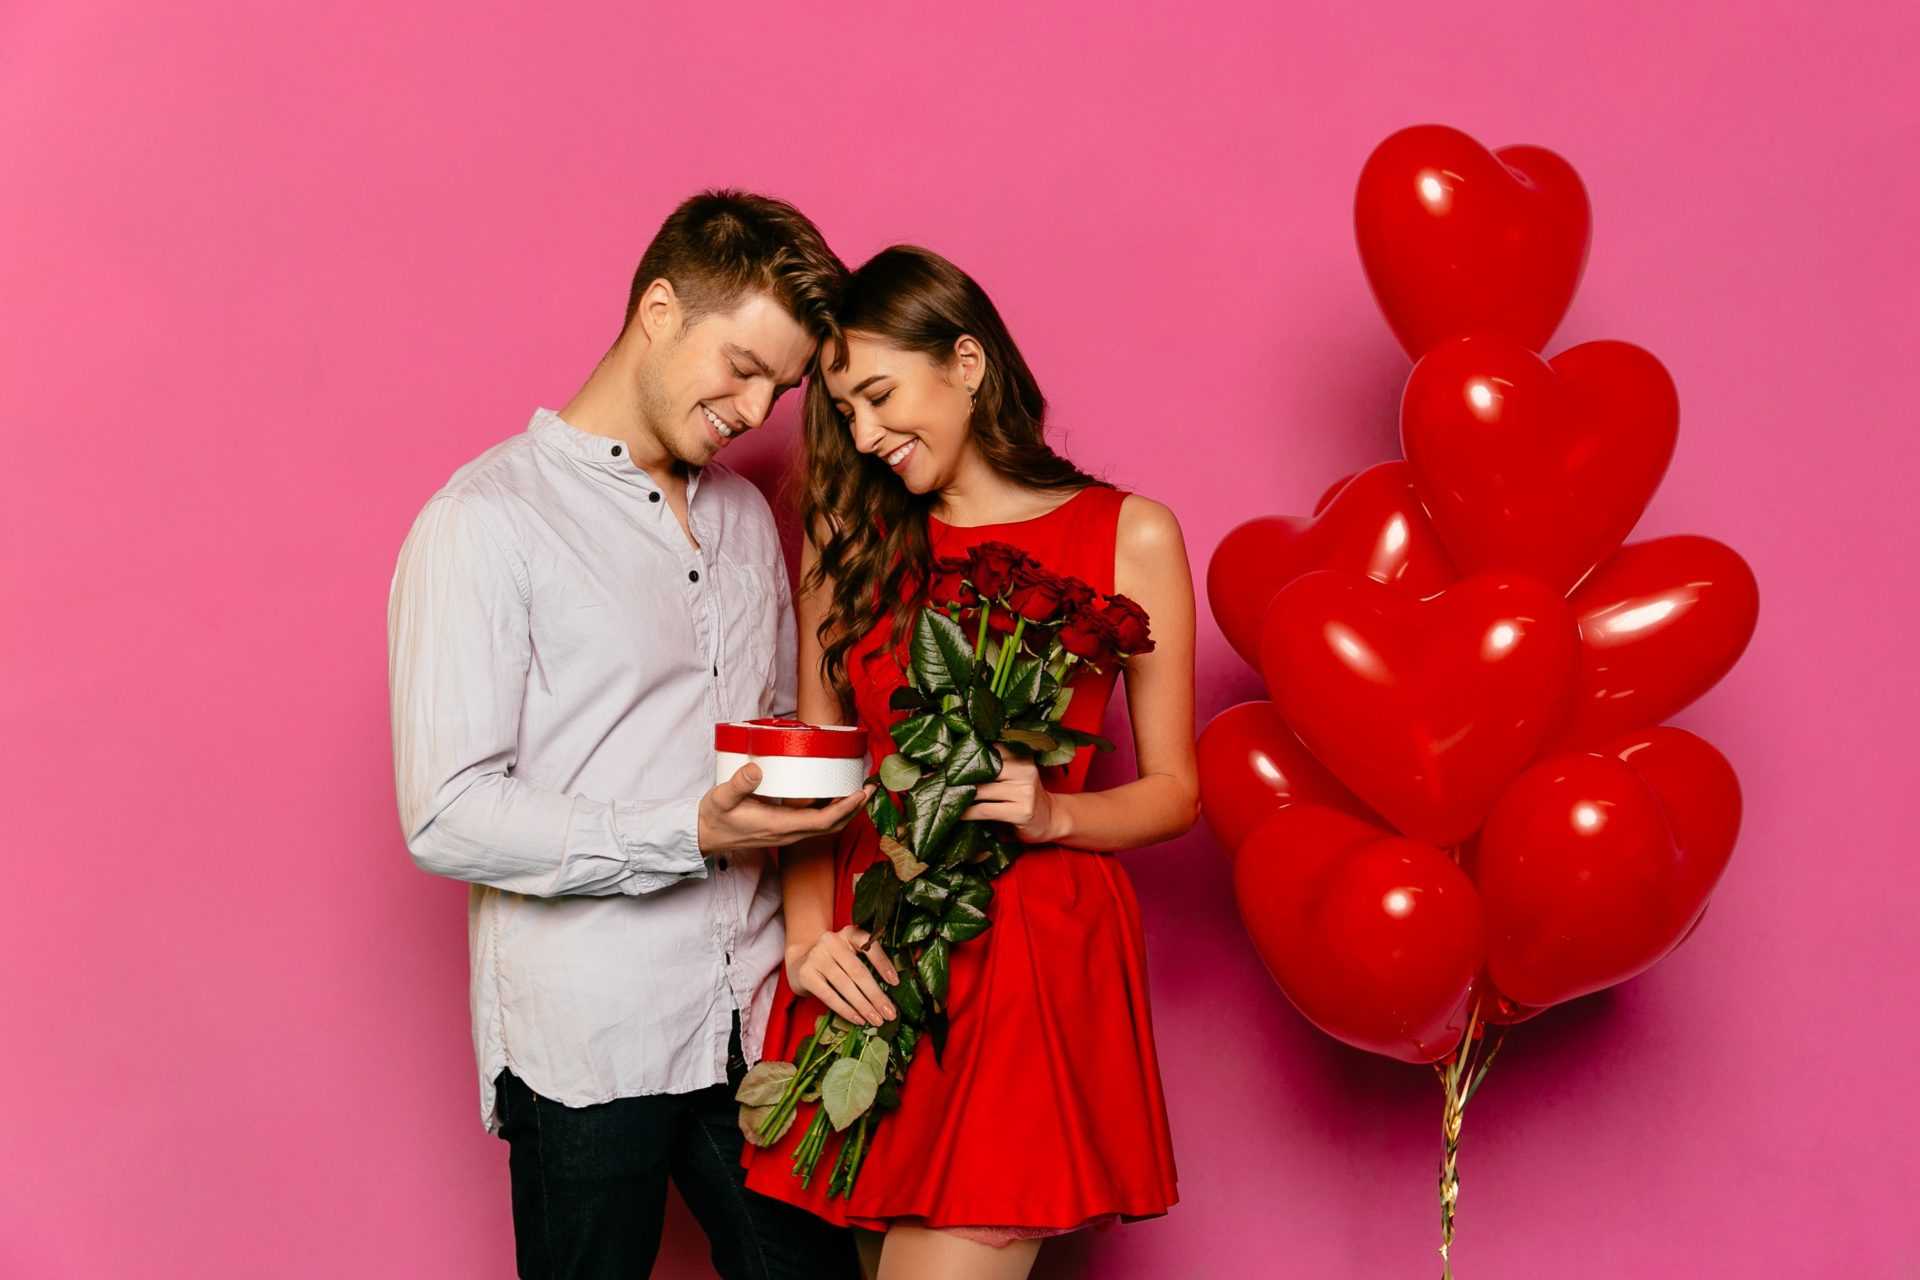 14 Most Beautiful Valentine's Day Gifts that Will Melt Her Heart - Best Gift Listings